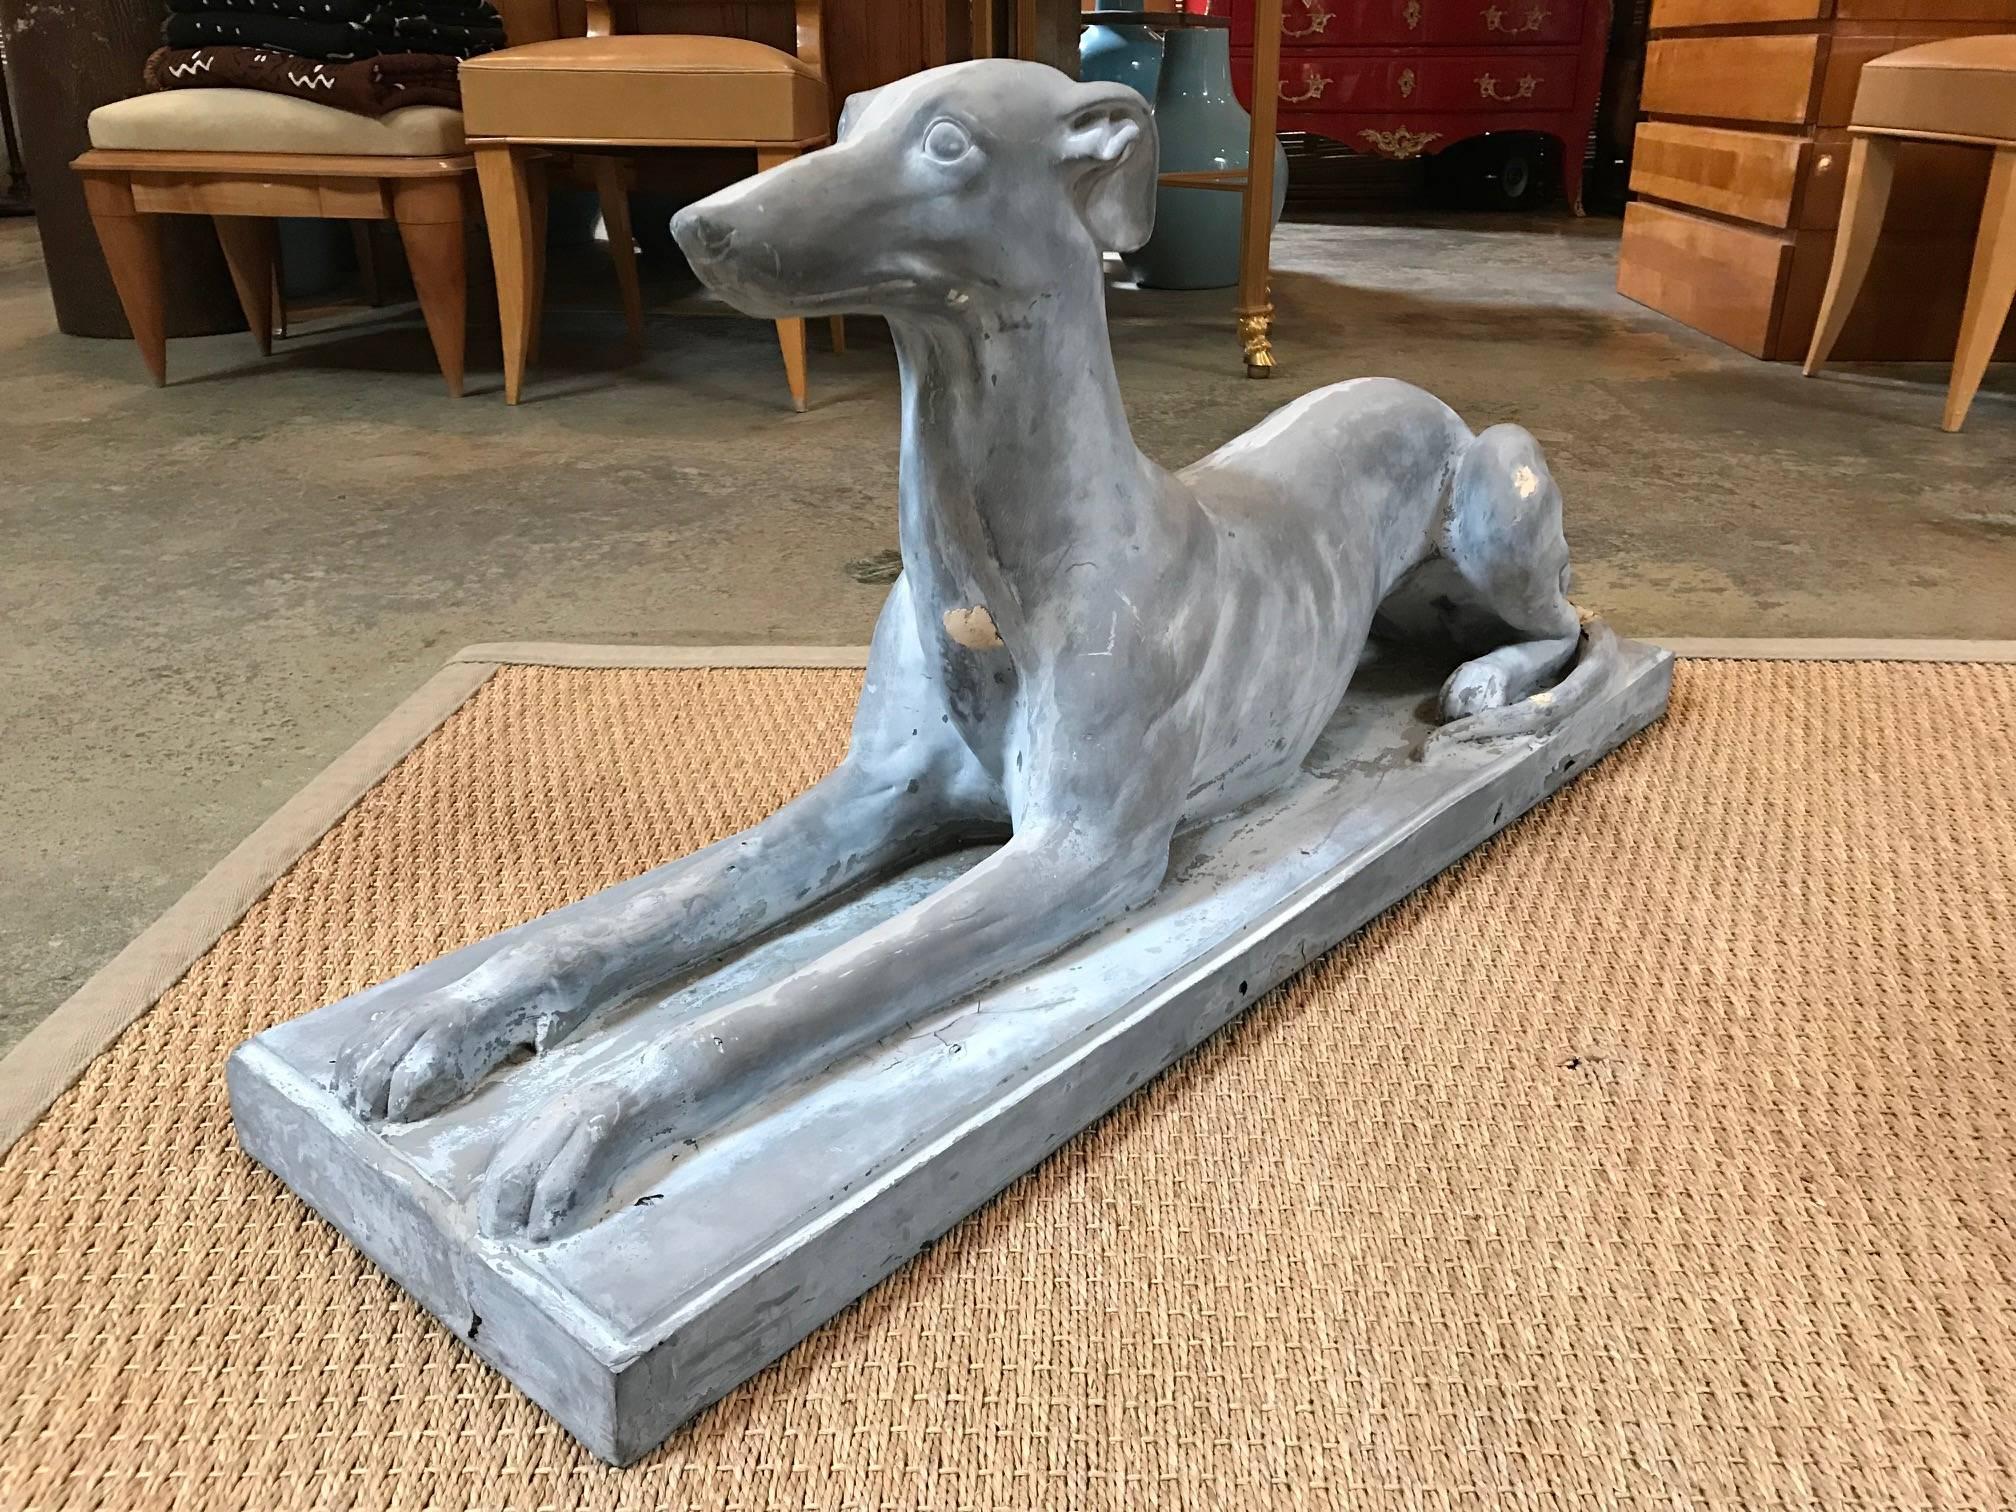 Laying Whippet dog with upright posture molded in composition material.